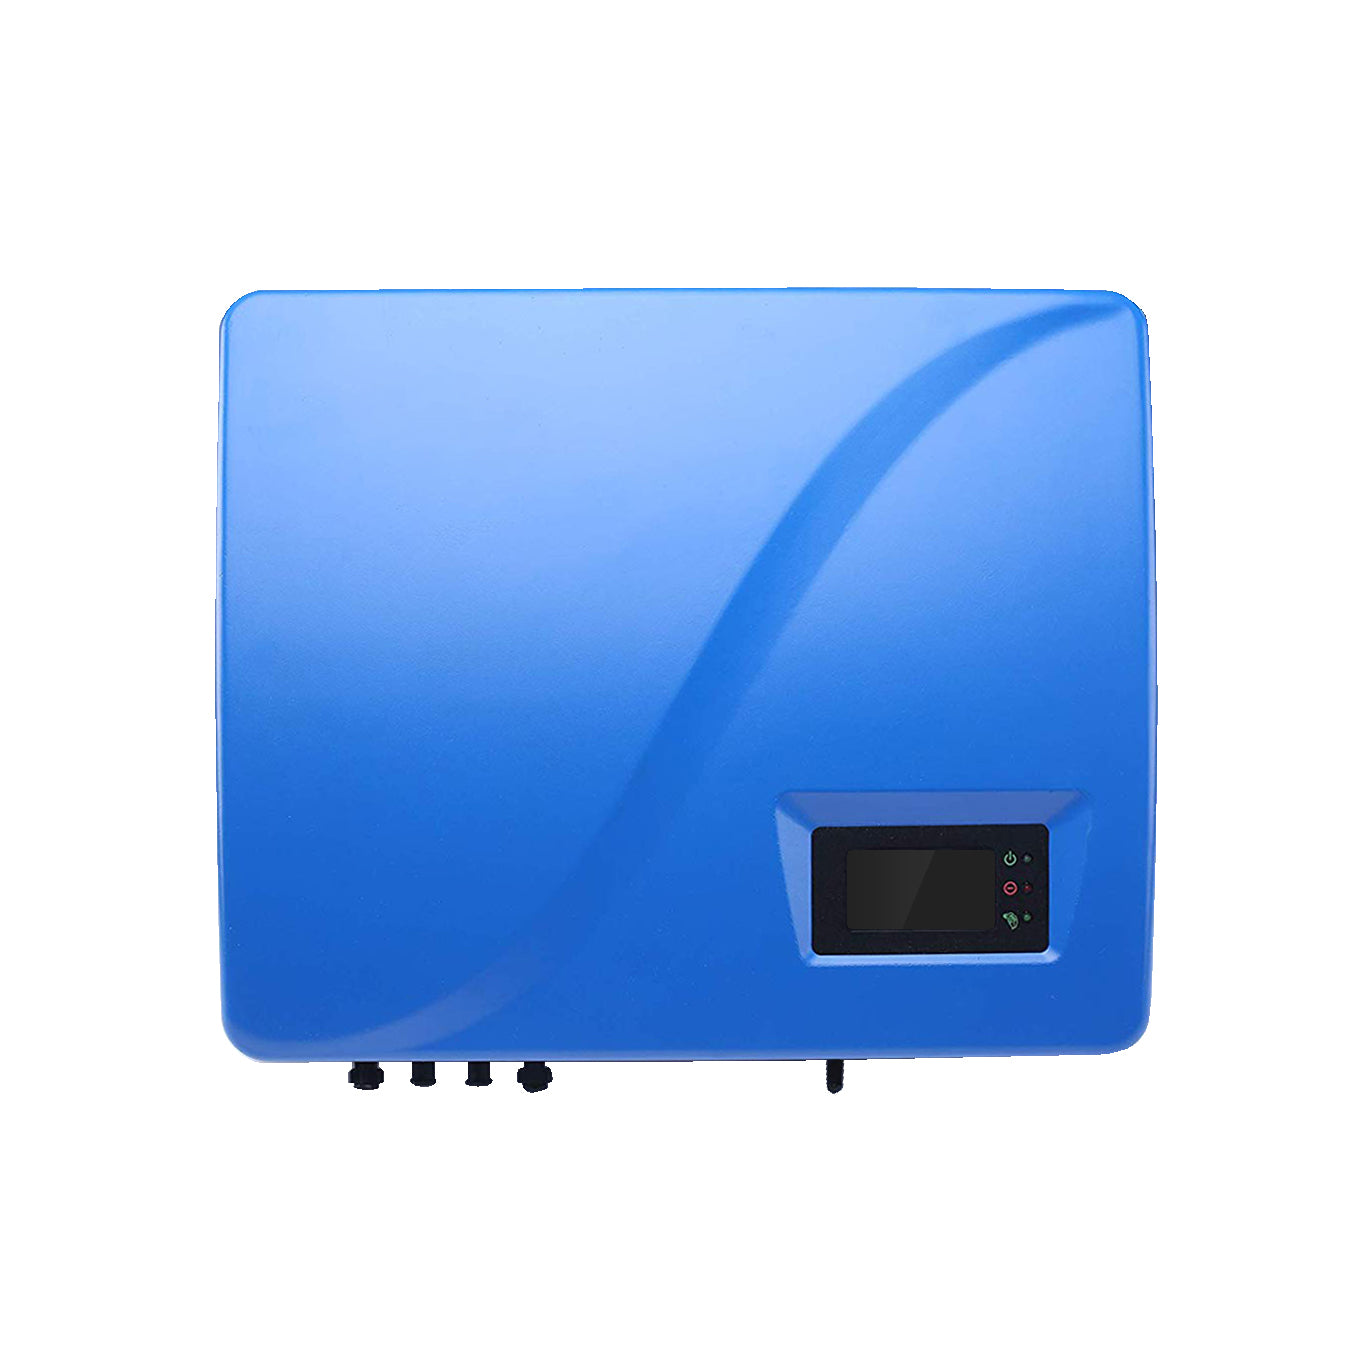 Tumo-Int 6kVA Grid-Tie Solar Inverter with Power Limiter and Wi-Fi Communication